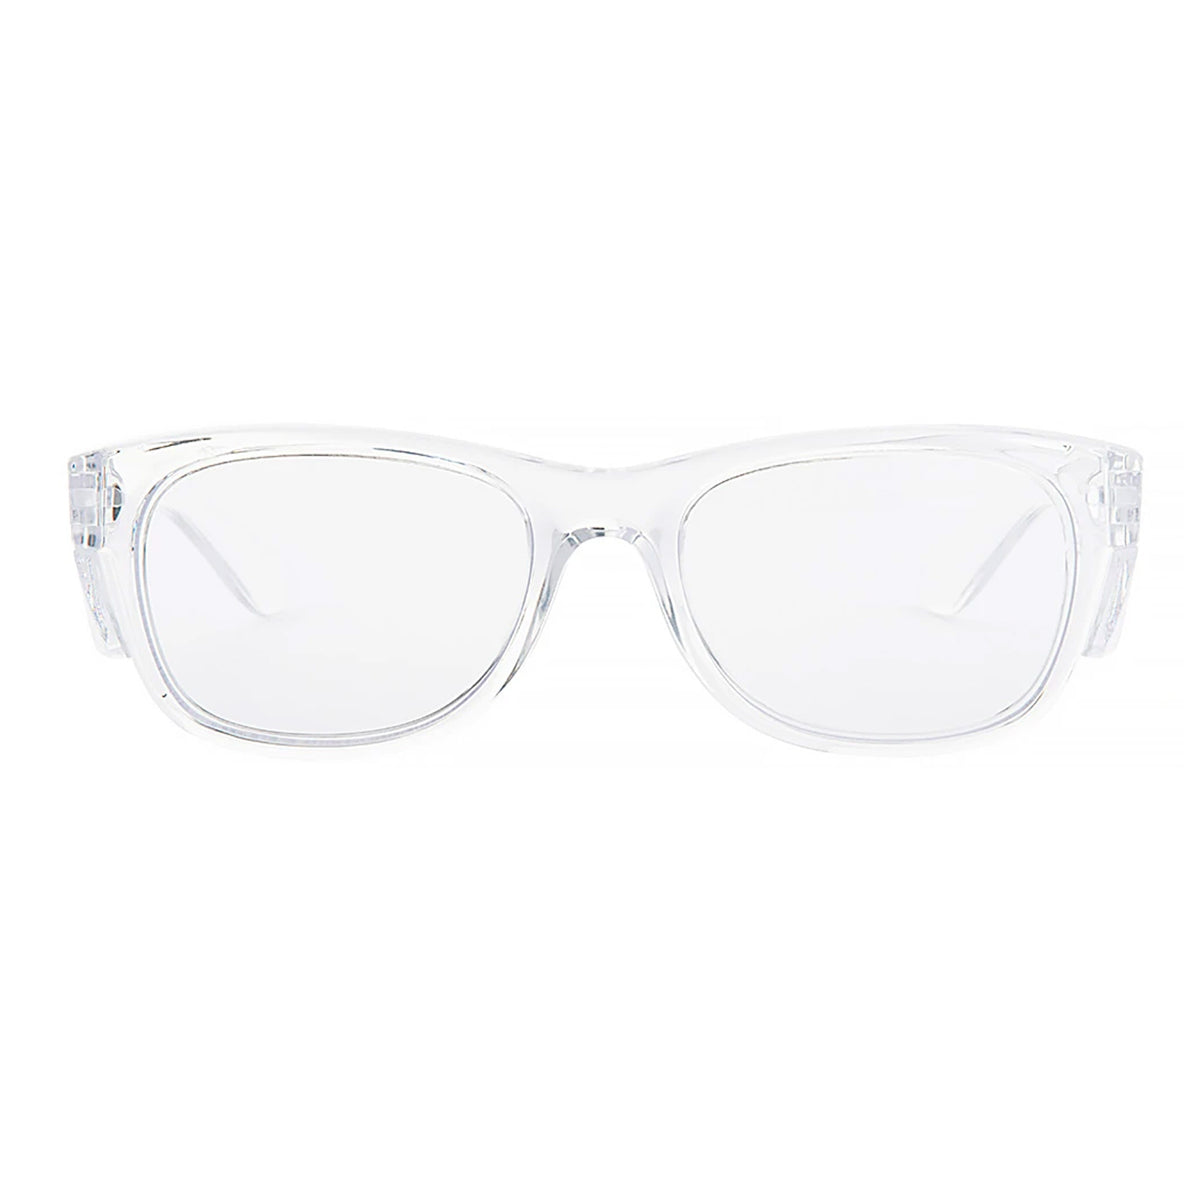 safe style classics clear frame with clear lens